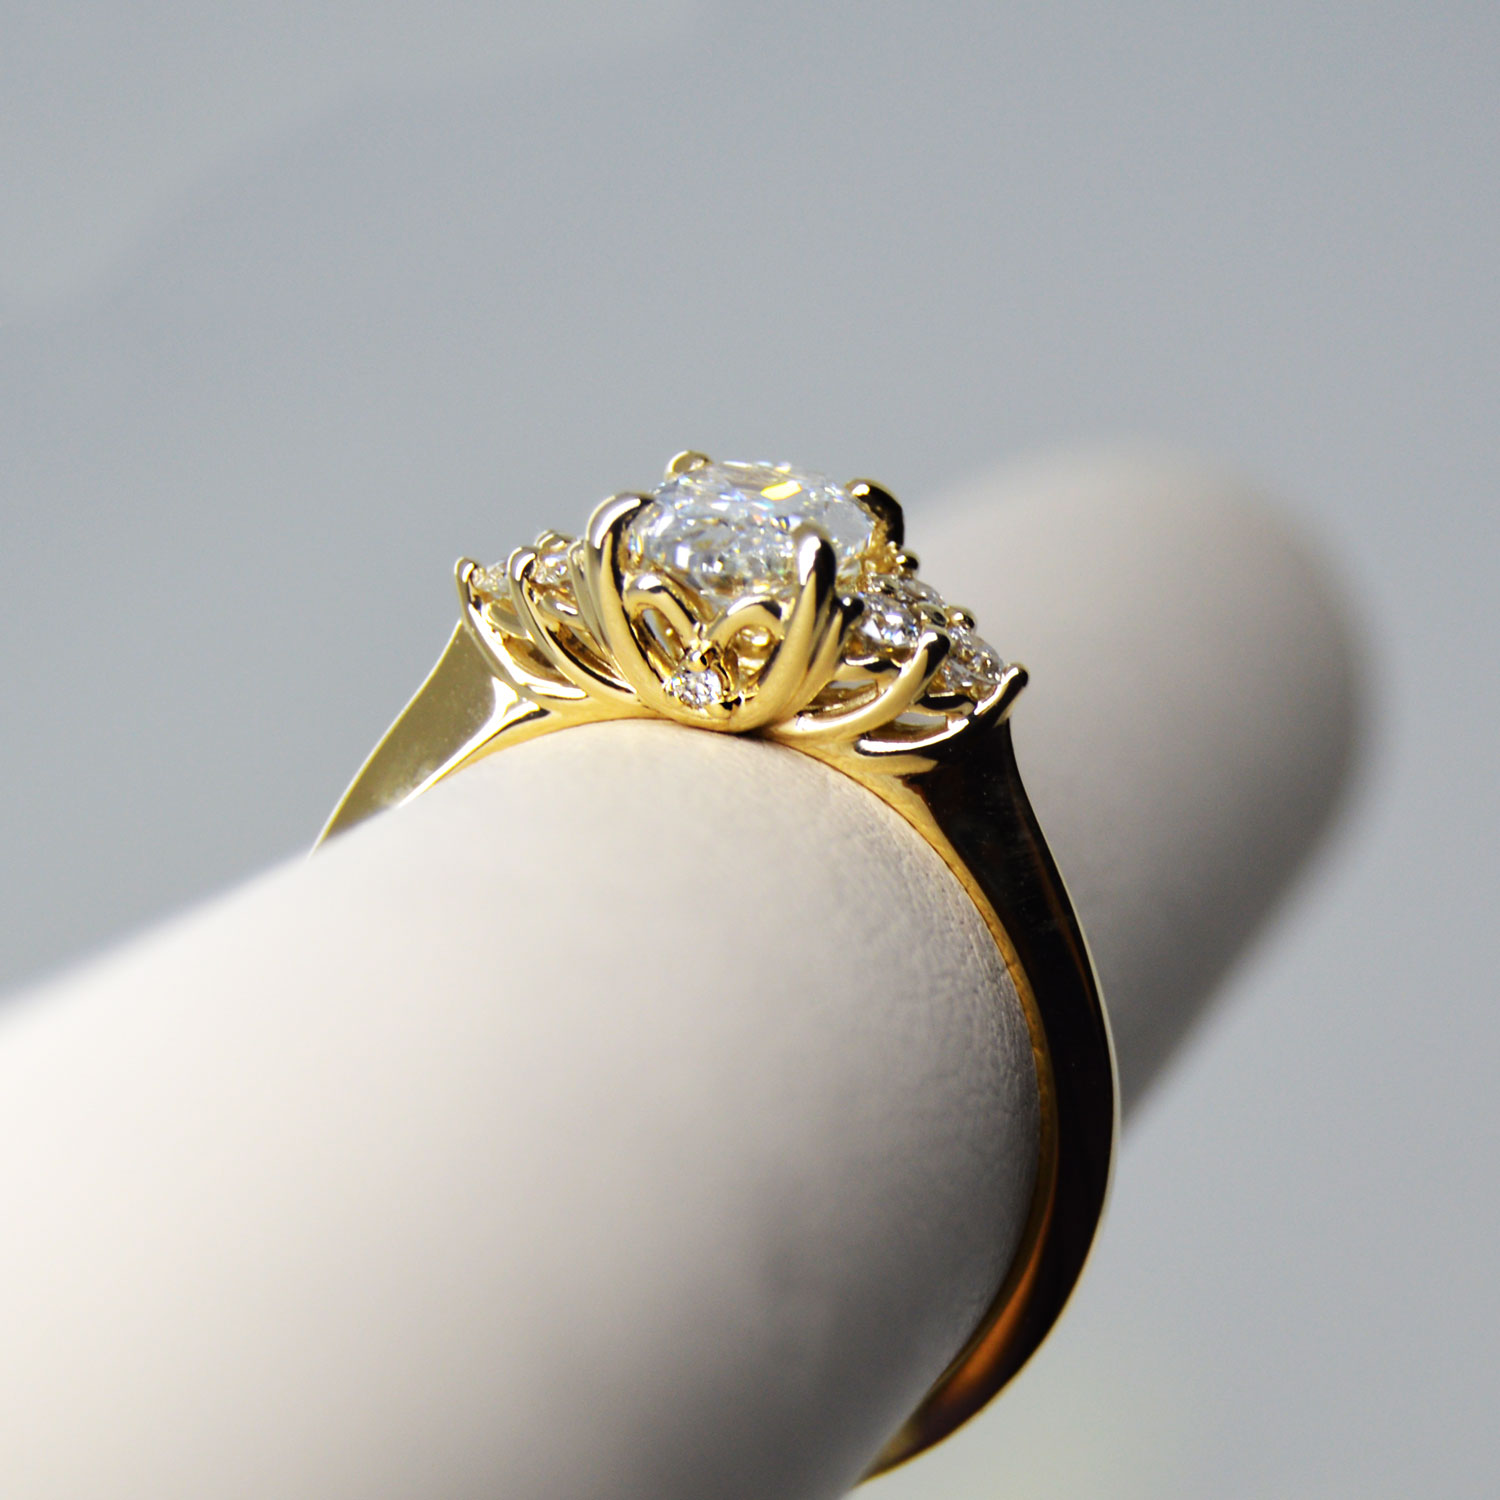 14Kt yellow gold engagement ring featuring .90 CT oval cut diamond and .19 CTW accent diamonds.